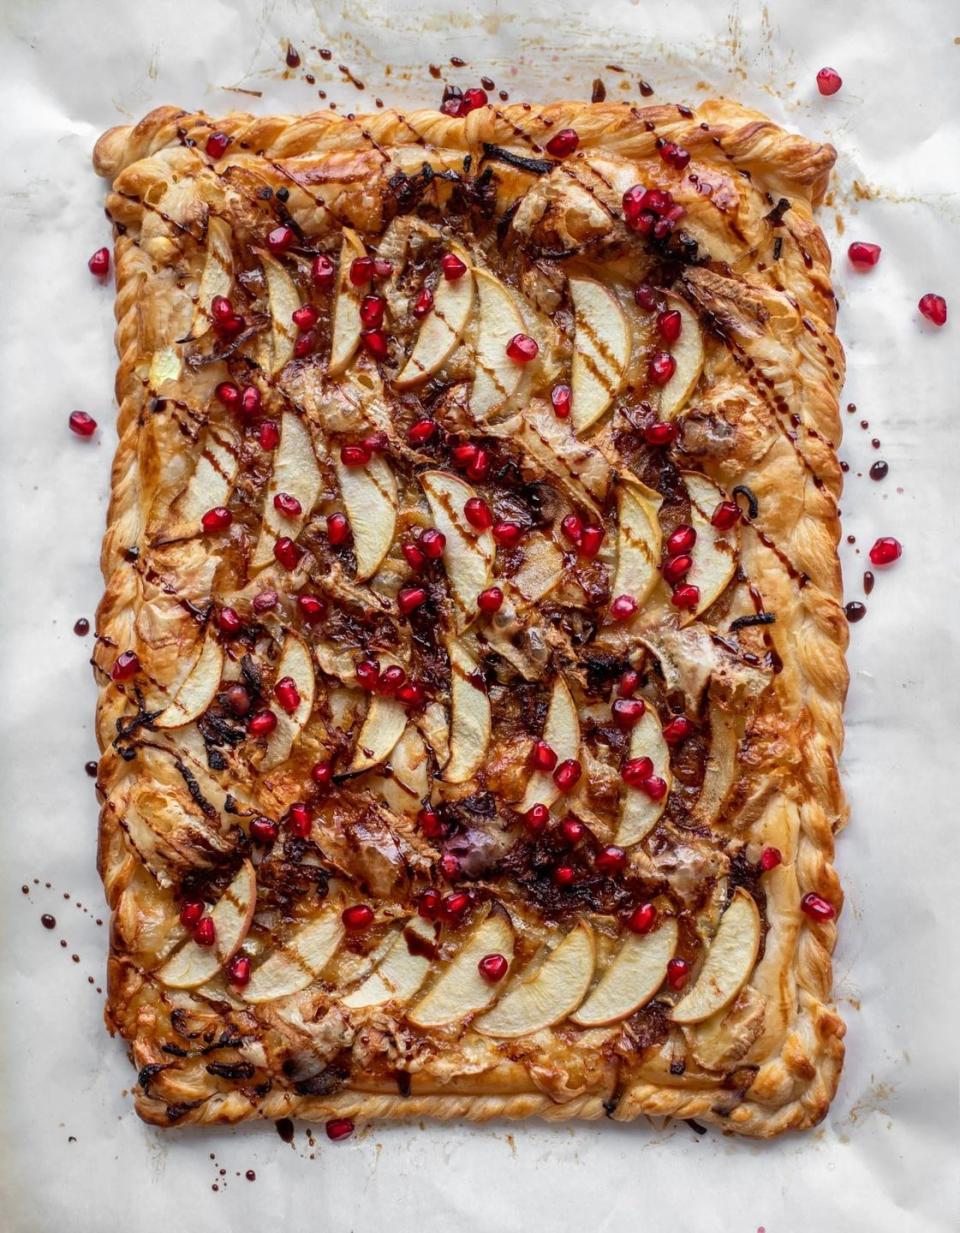 Caramelized Onion, Apple, and Brie Tart